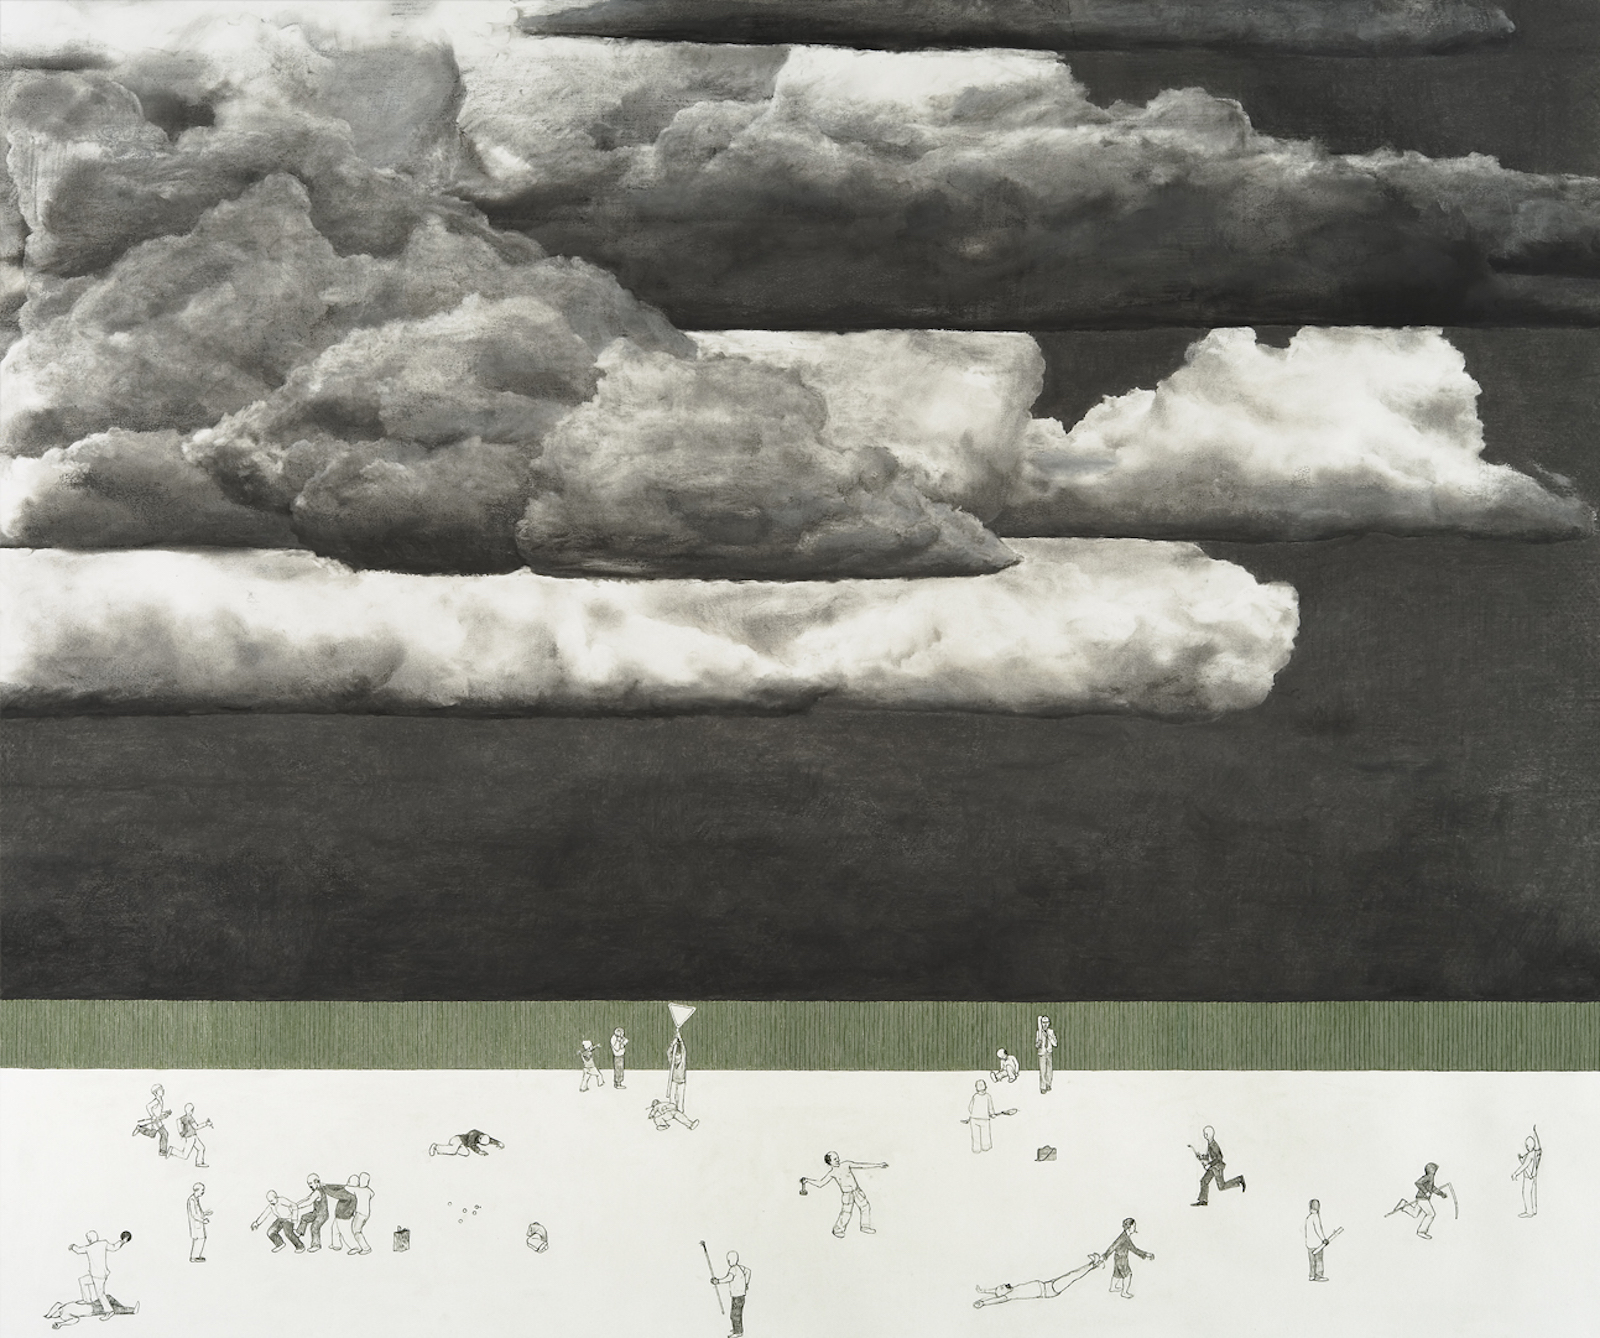 Patrick Nilson, "The Big Darkness" 2006. Soft pastel , charcoal and pencil on paper, 140 x 160 cm